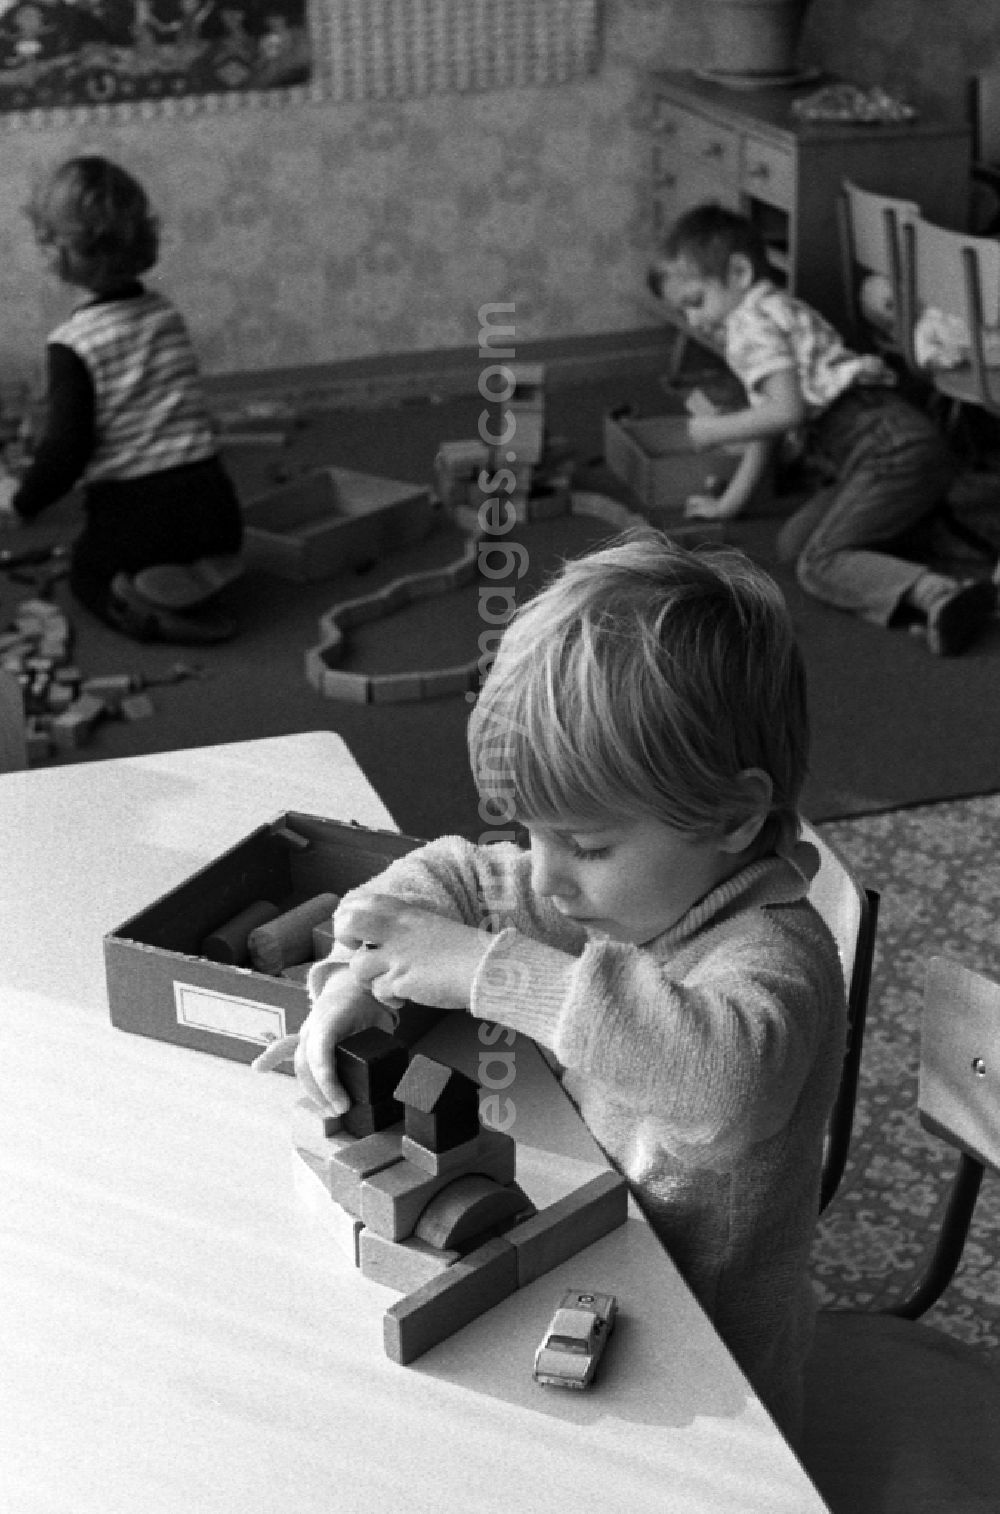 GDR picture archive: Berlin - Games and fun with toddlers in kindergarten playing with wooden blocks in Berlin Eastberlin, the former capital of the GDR, German Democratic Republic